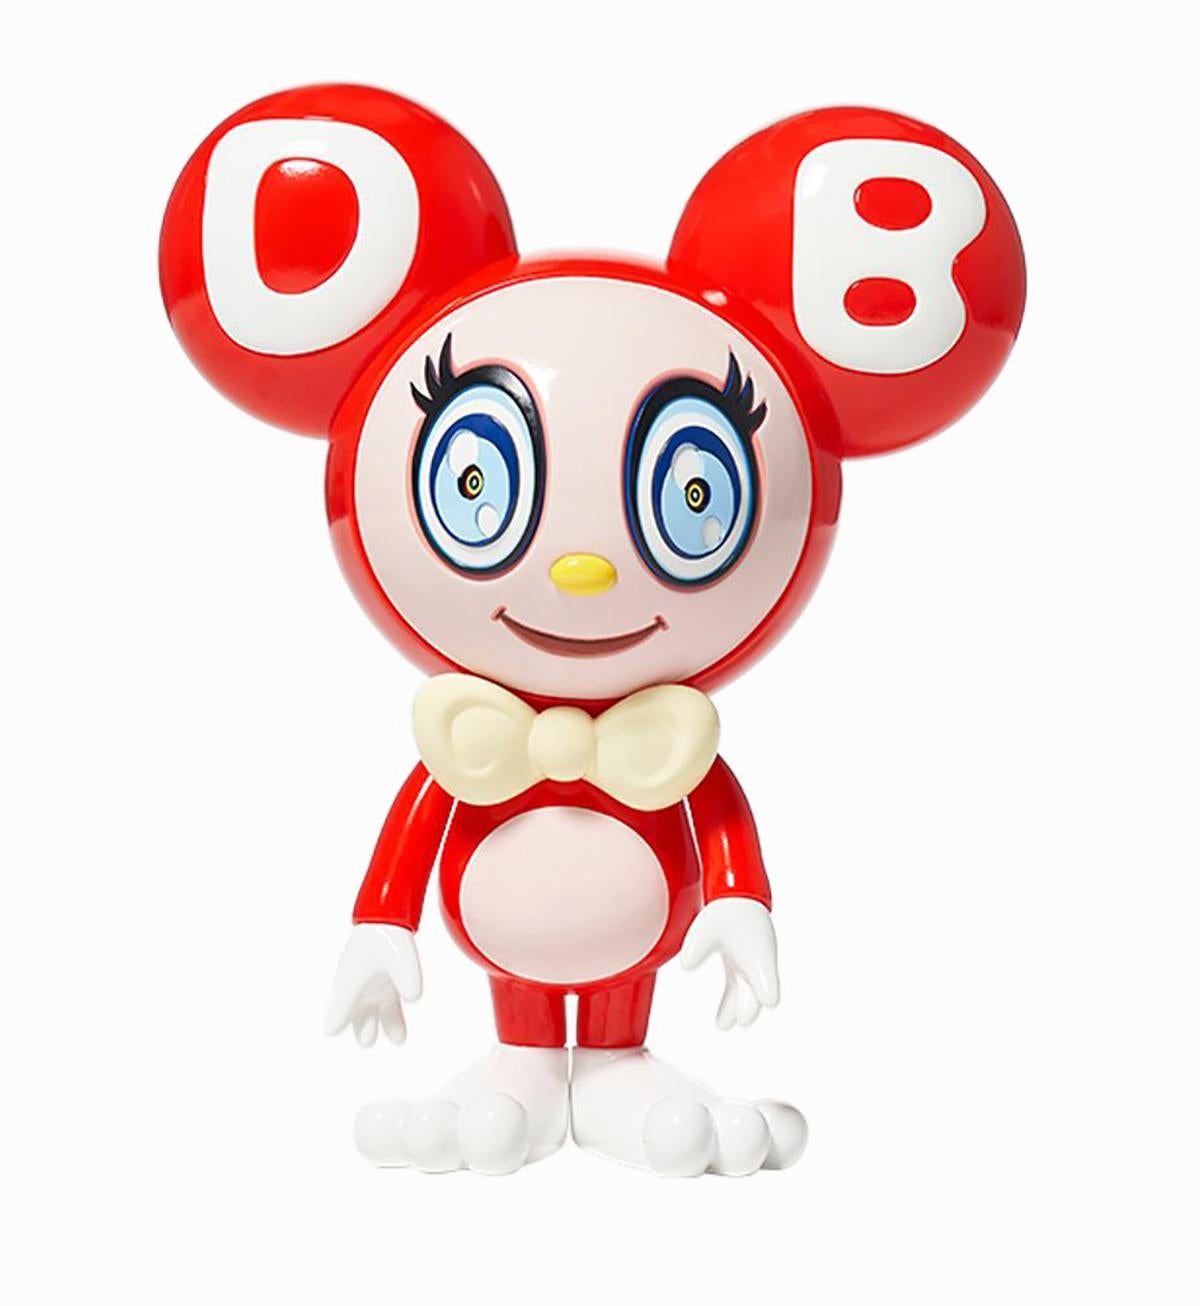 Takashi Murakami DOB-kun Figure:
A limited edition Takashi Murakami art toy featuring the artist's iconic DOB character. DOB-kun’s name, defined in his rounded ears and face, is the first three letters of an improvised phrase that is a nonsensical